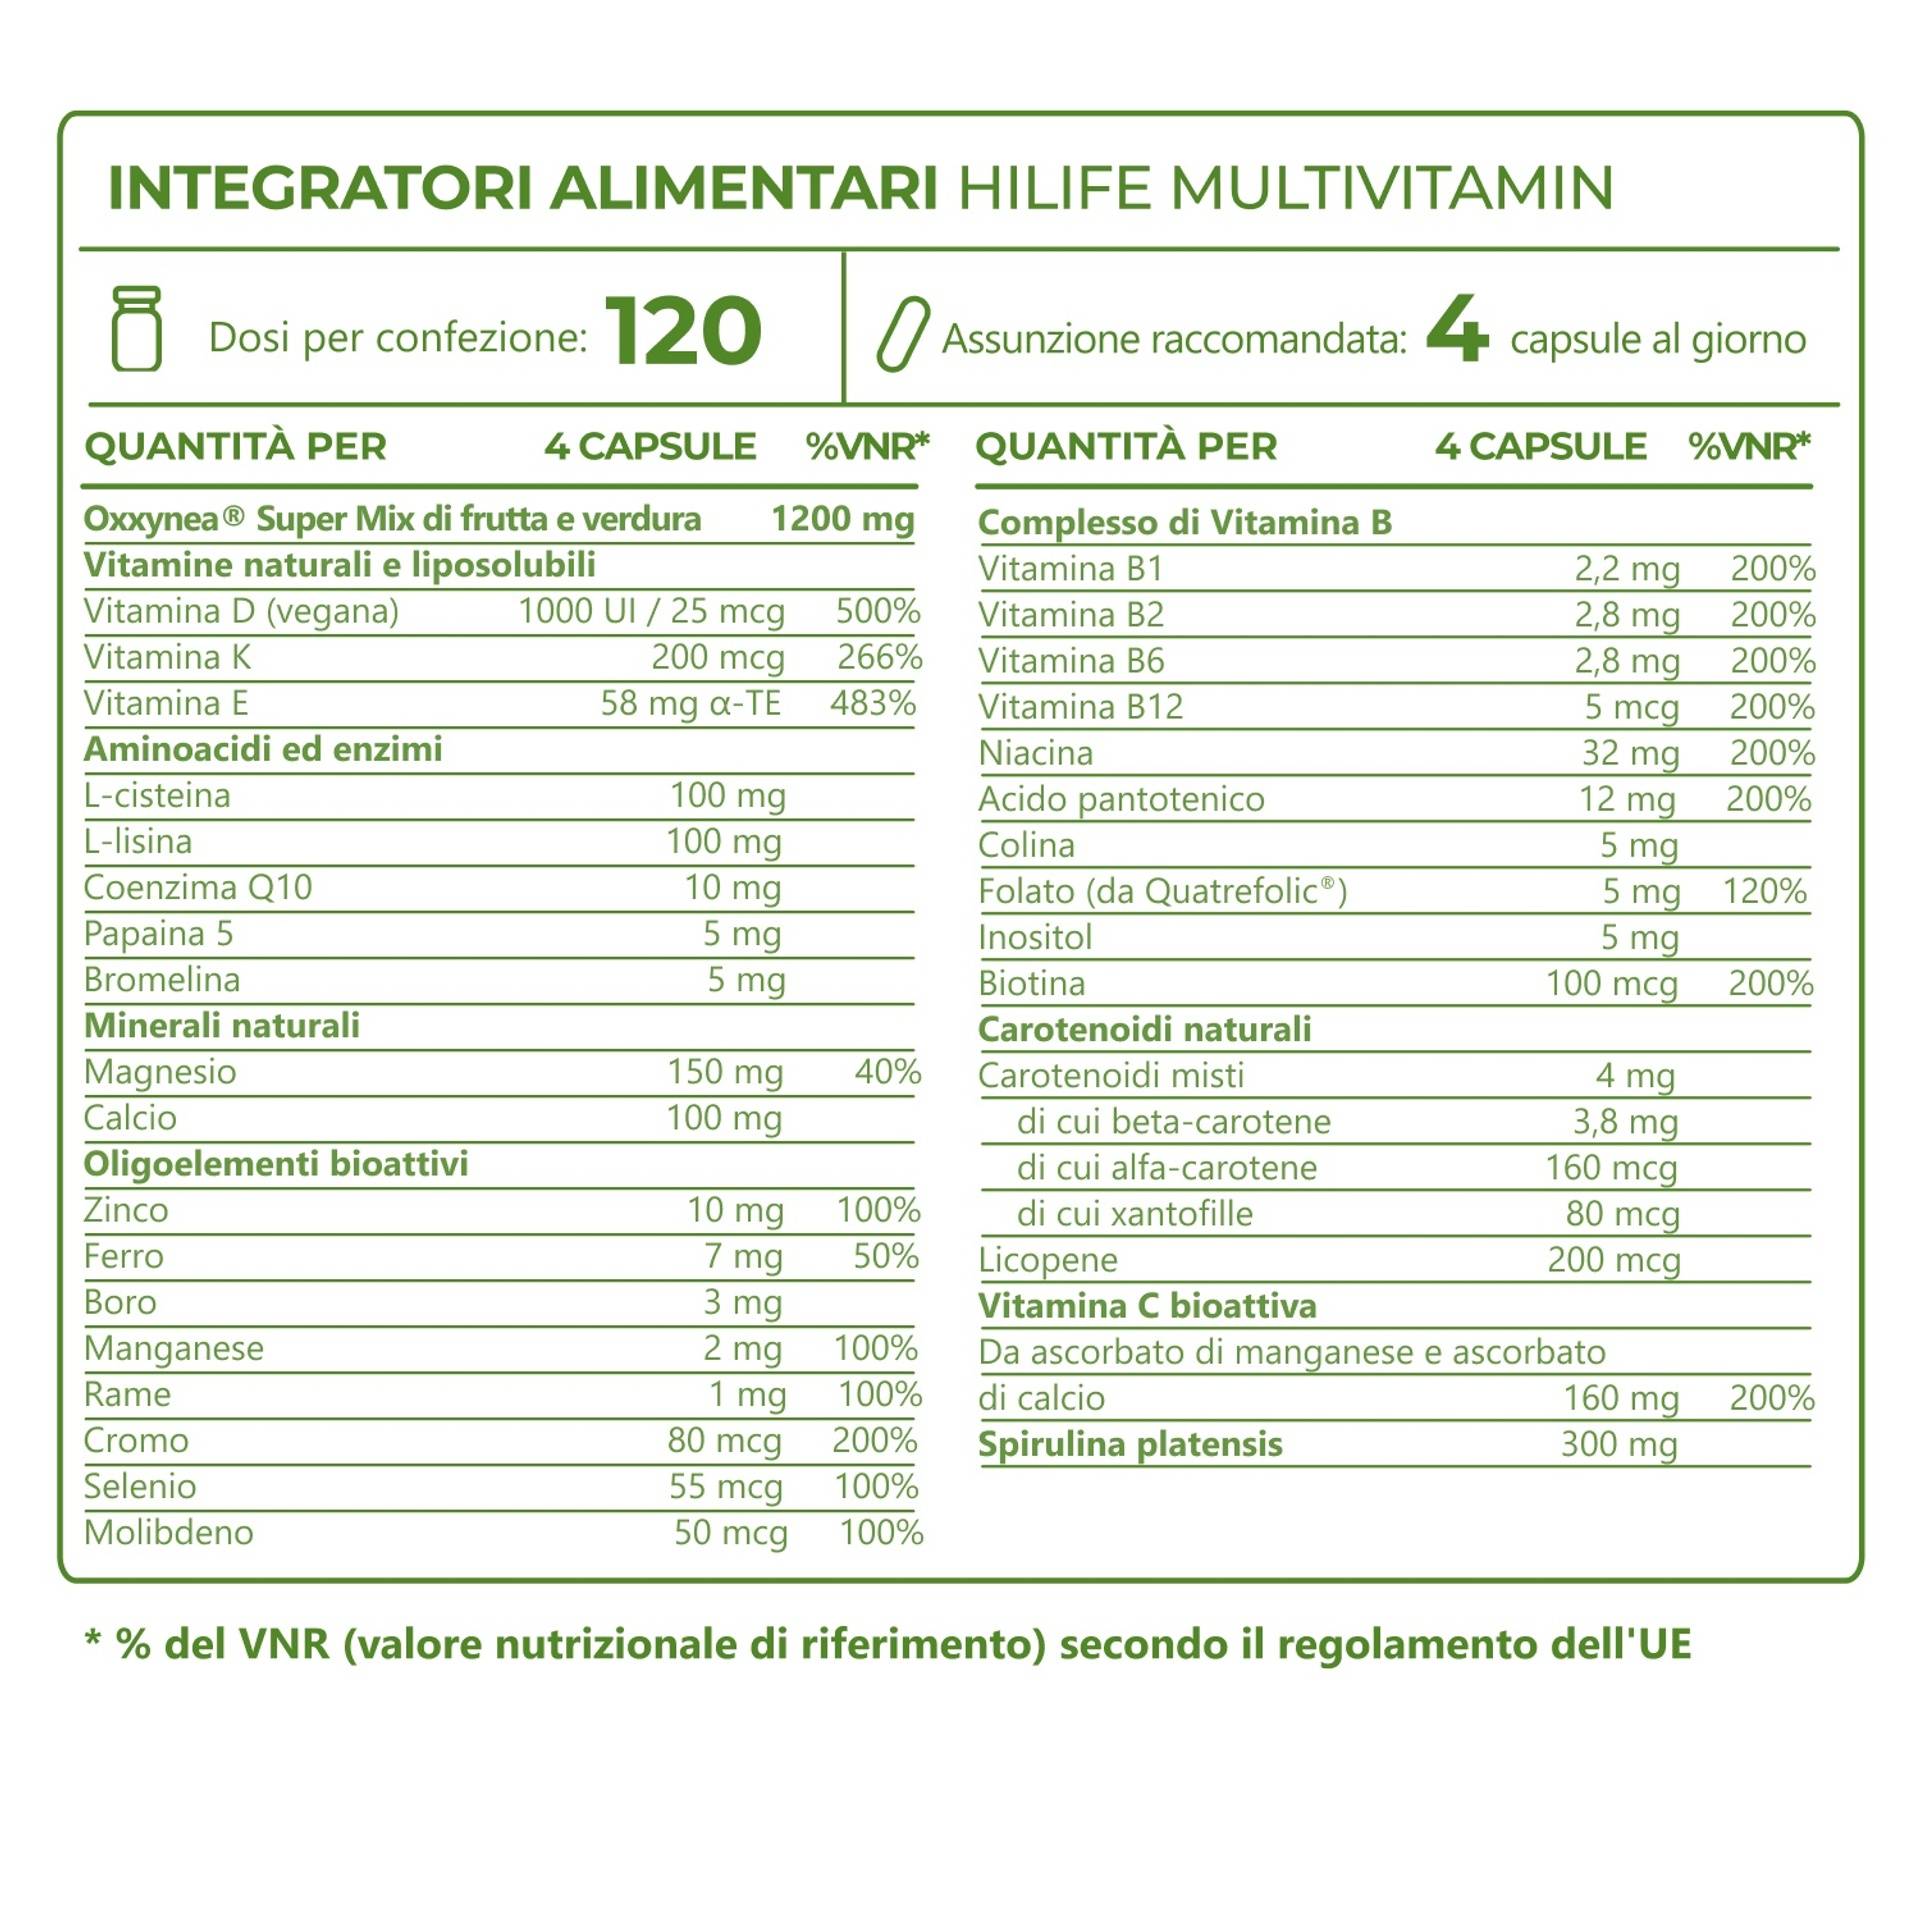 5_Ingredients_Hilife Multivitamin_6900-04_IT.png